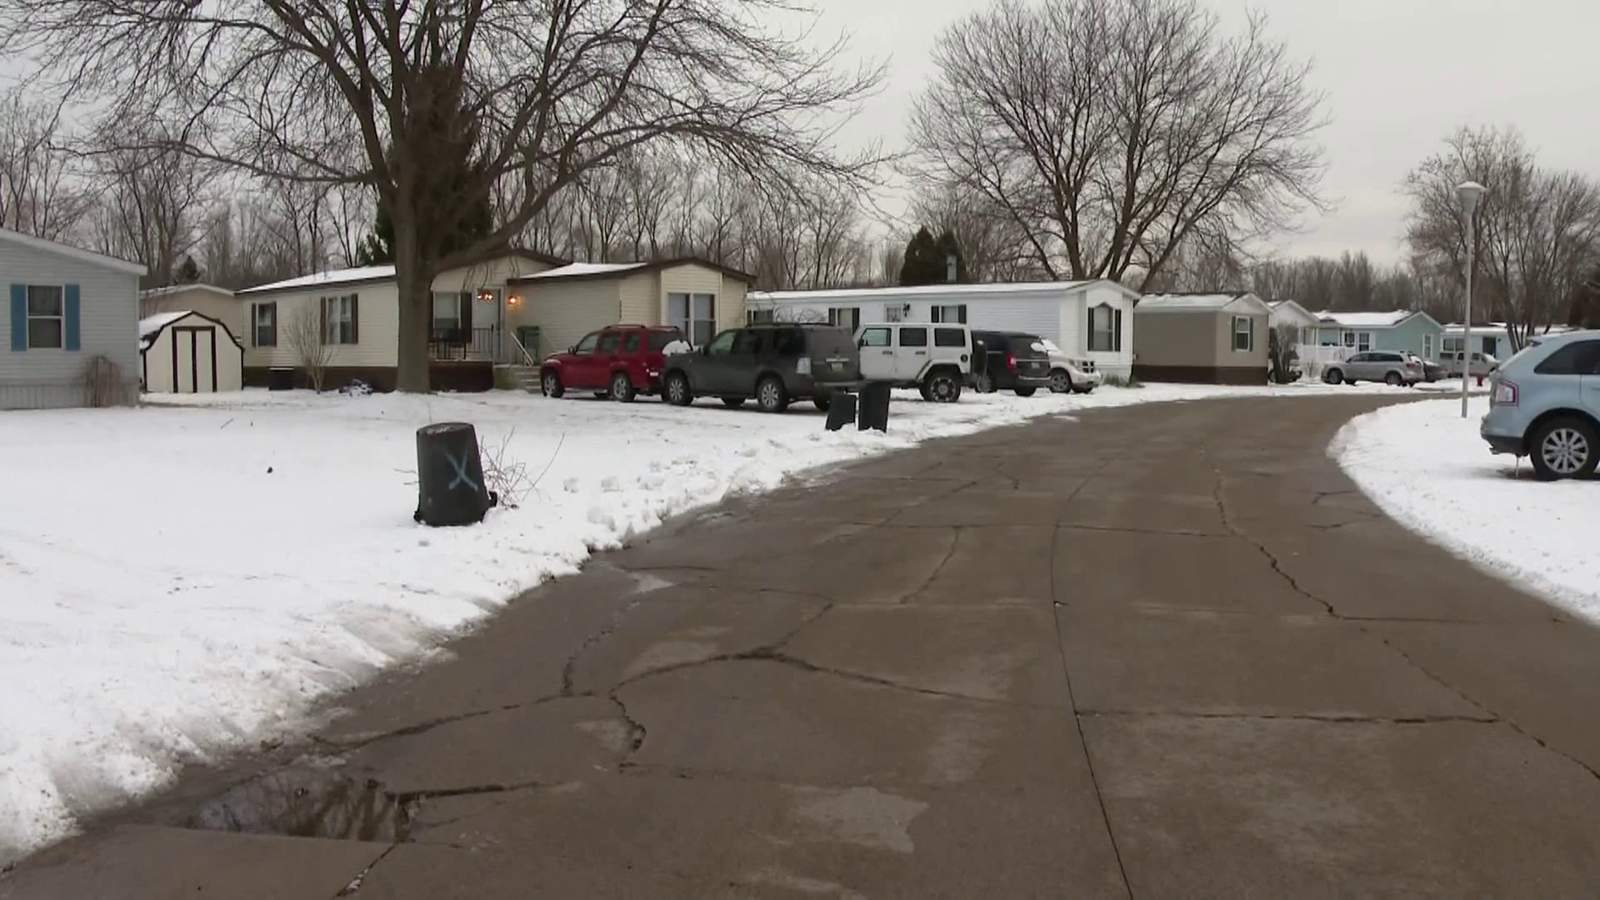 Police: No suspicious death investigation at Clay Township mobile home park